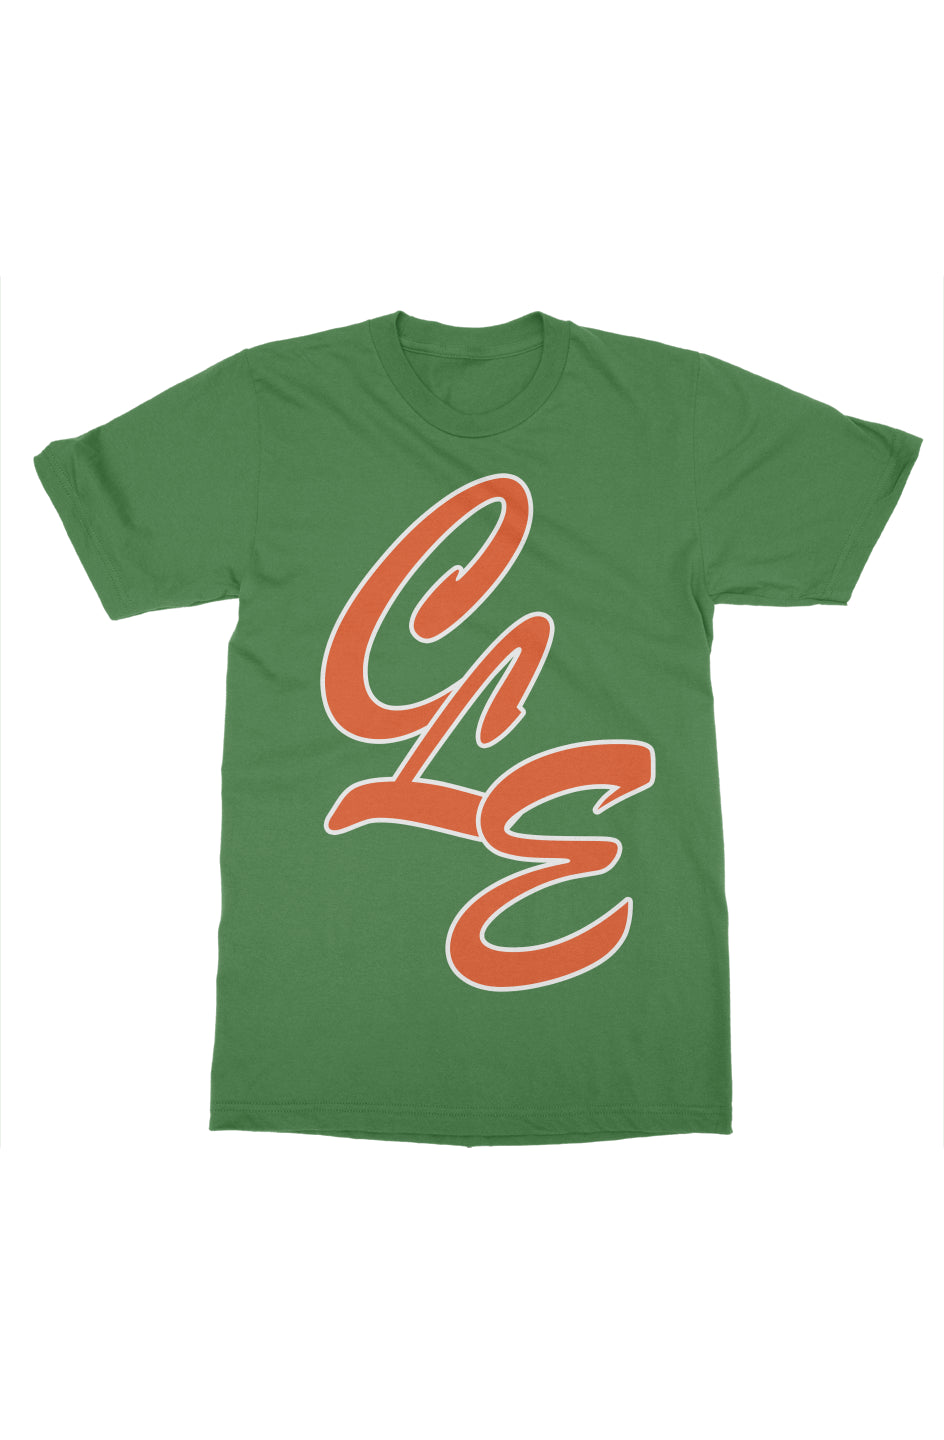 Dawg Food CLE St. Patty's Day Shirt